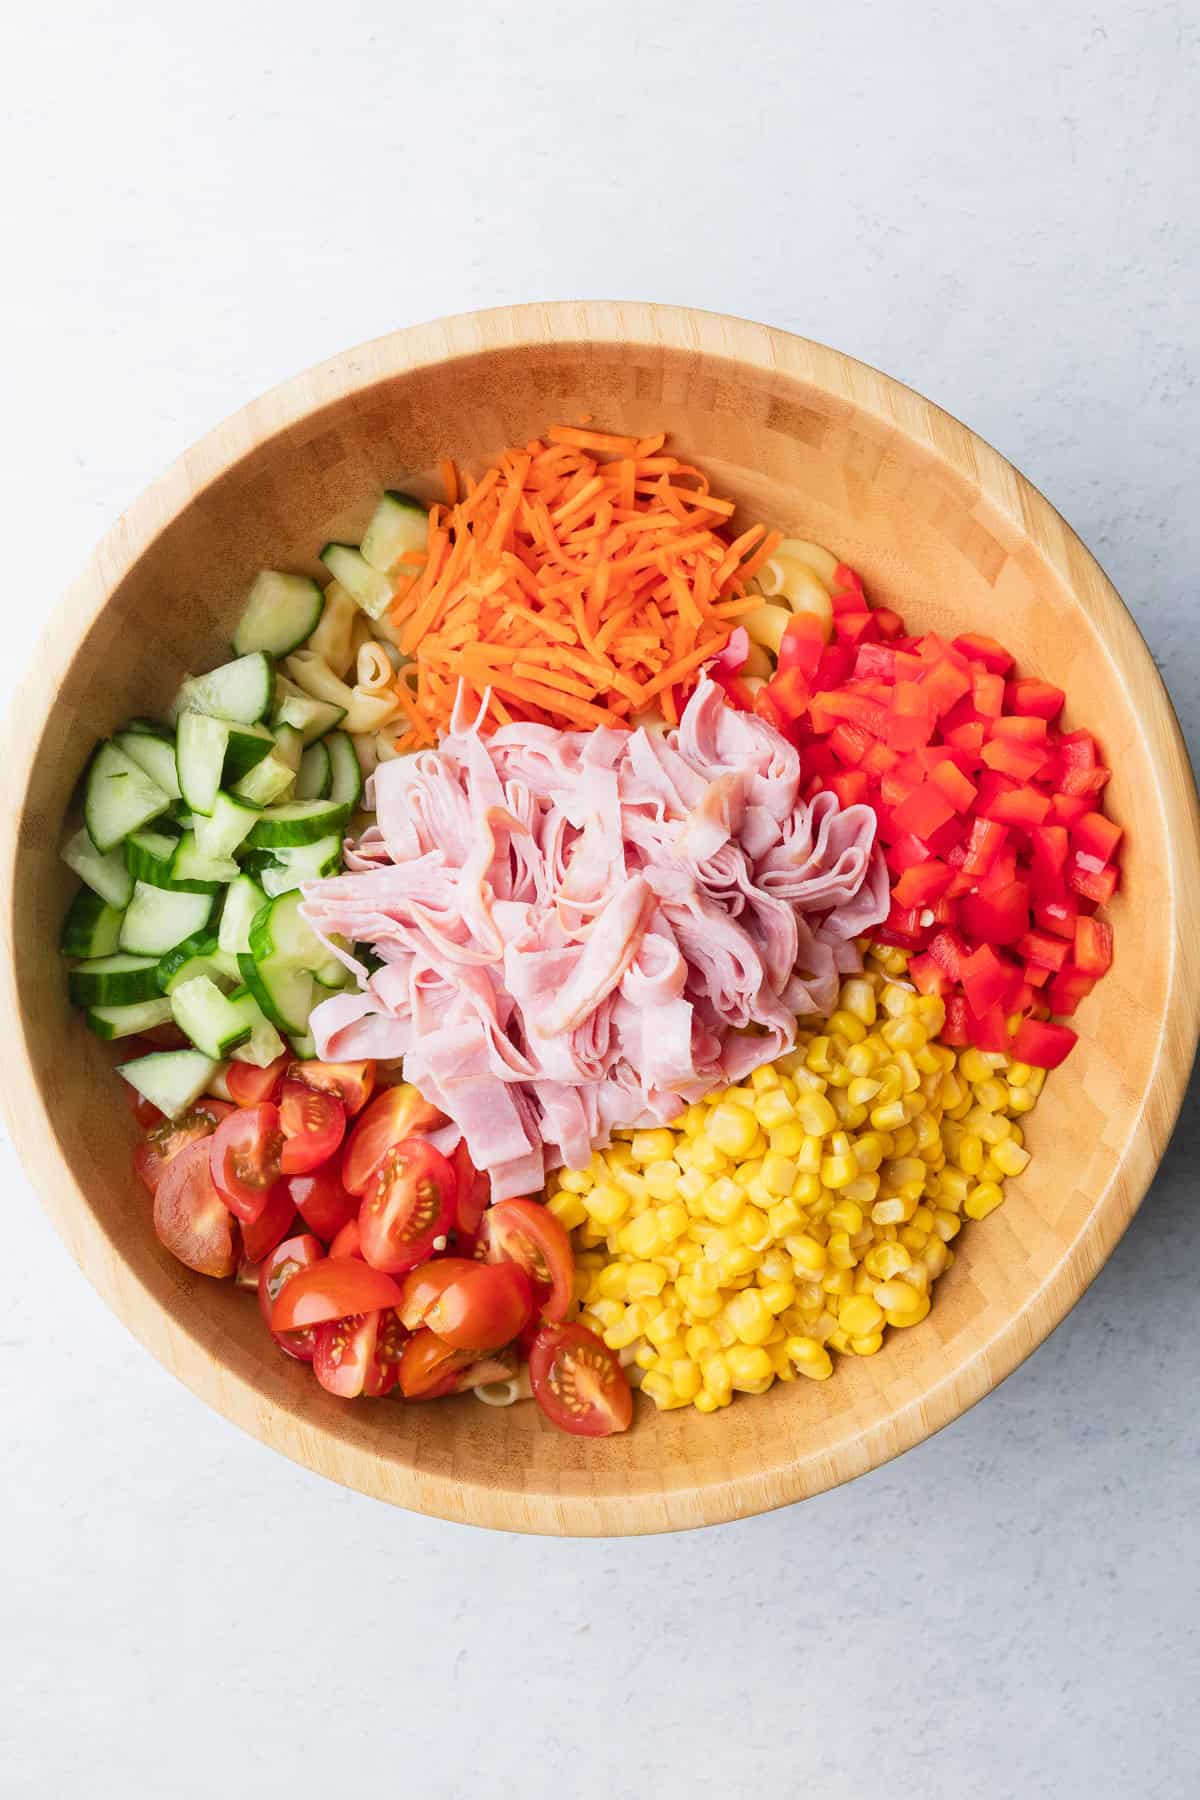 The salad ingredients in a bowl.